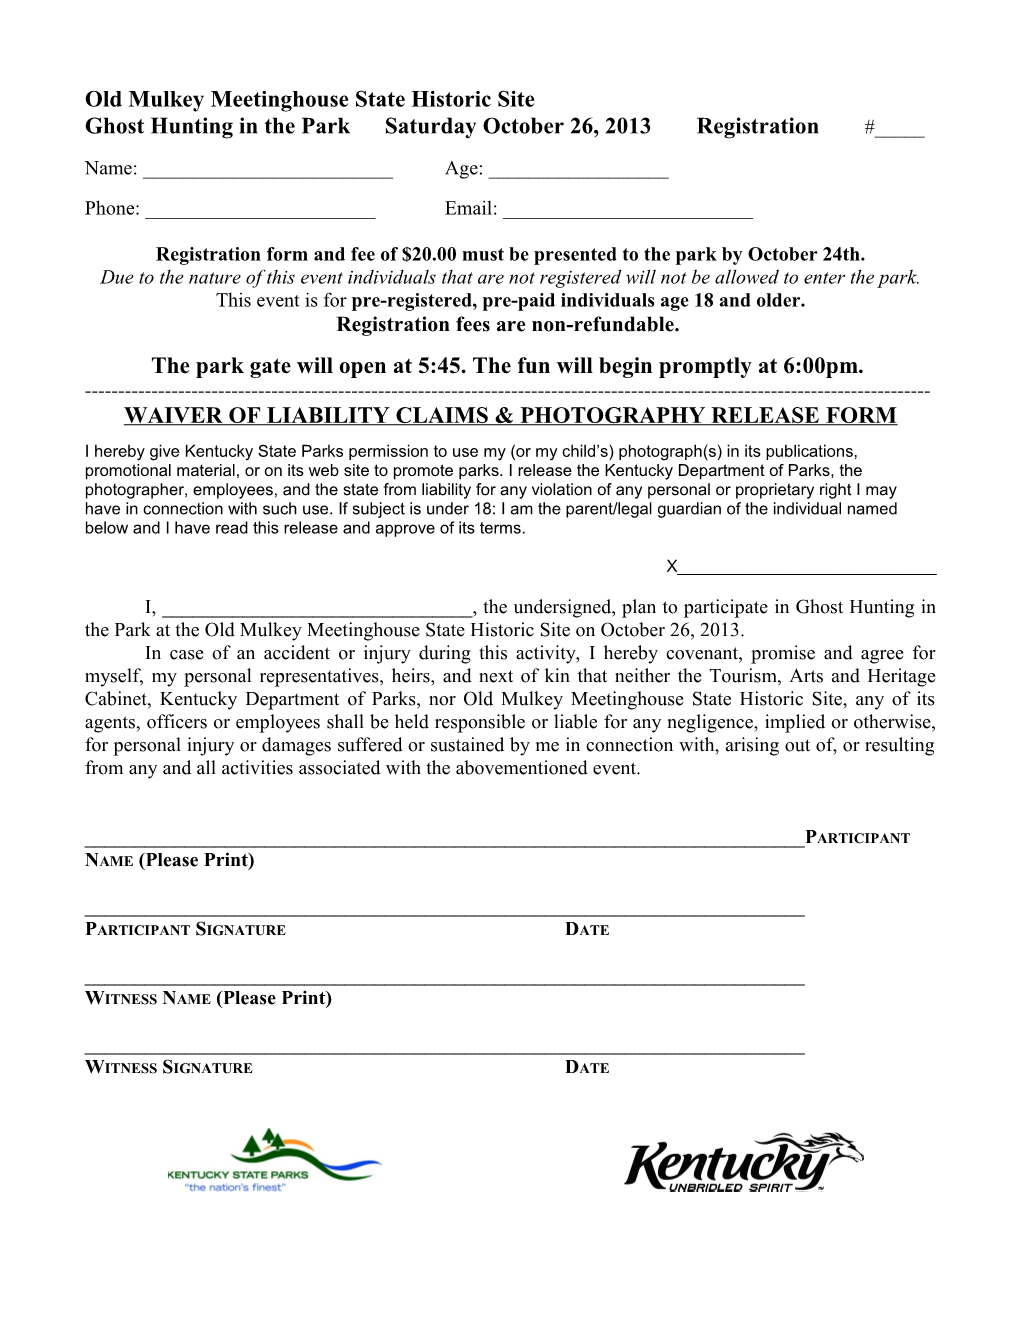 Old Mulkey State Historic Site Princesses in the Park Registration Sheet